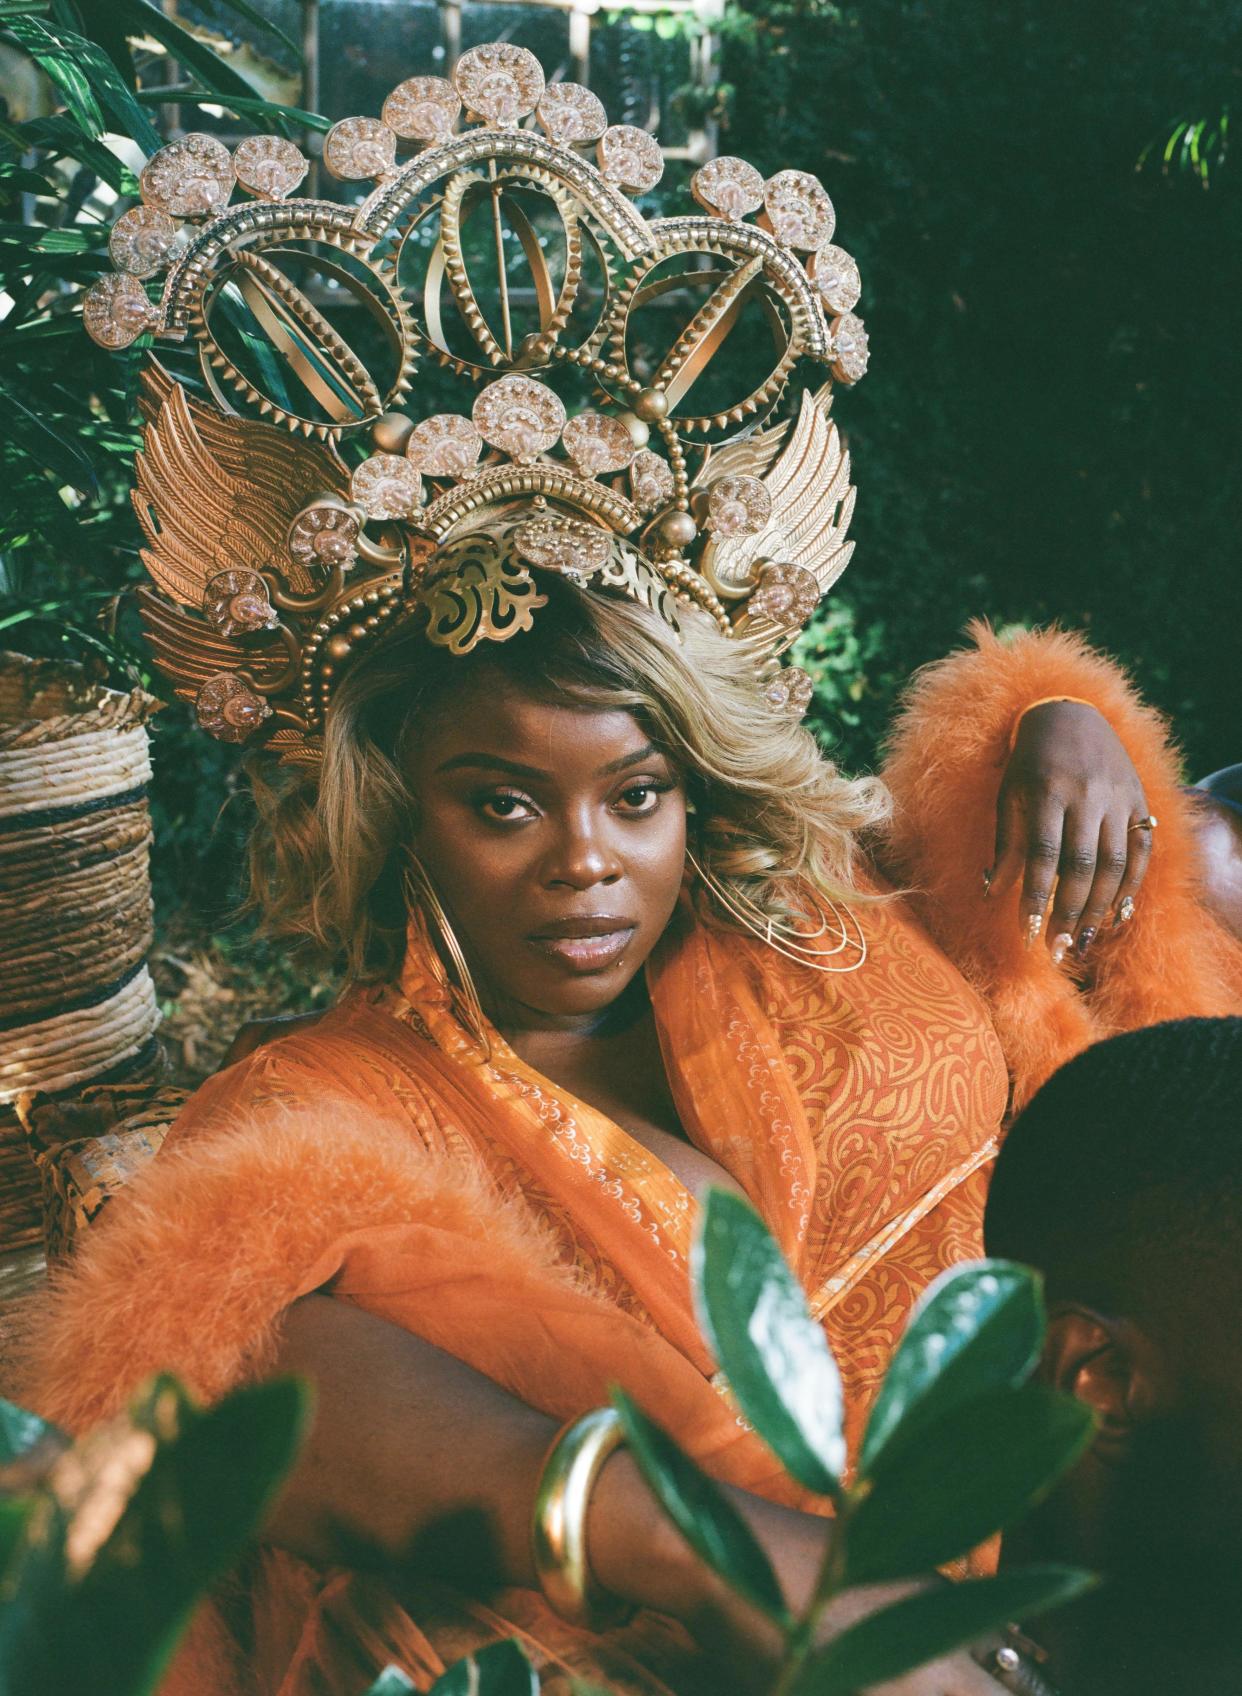 "My Way," six-time Grammy-nominee Yola's latest EP, arrives on May 24.